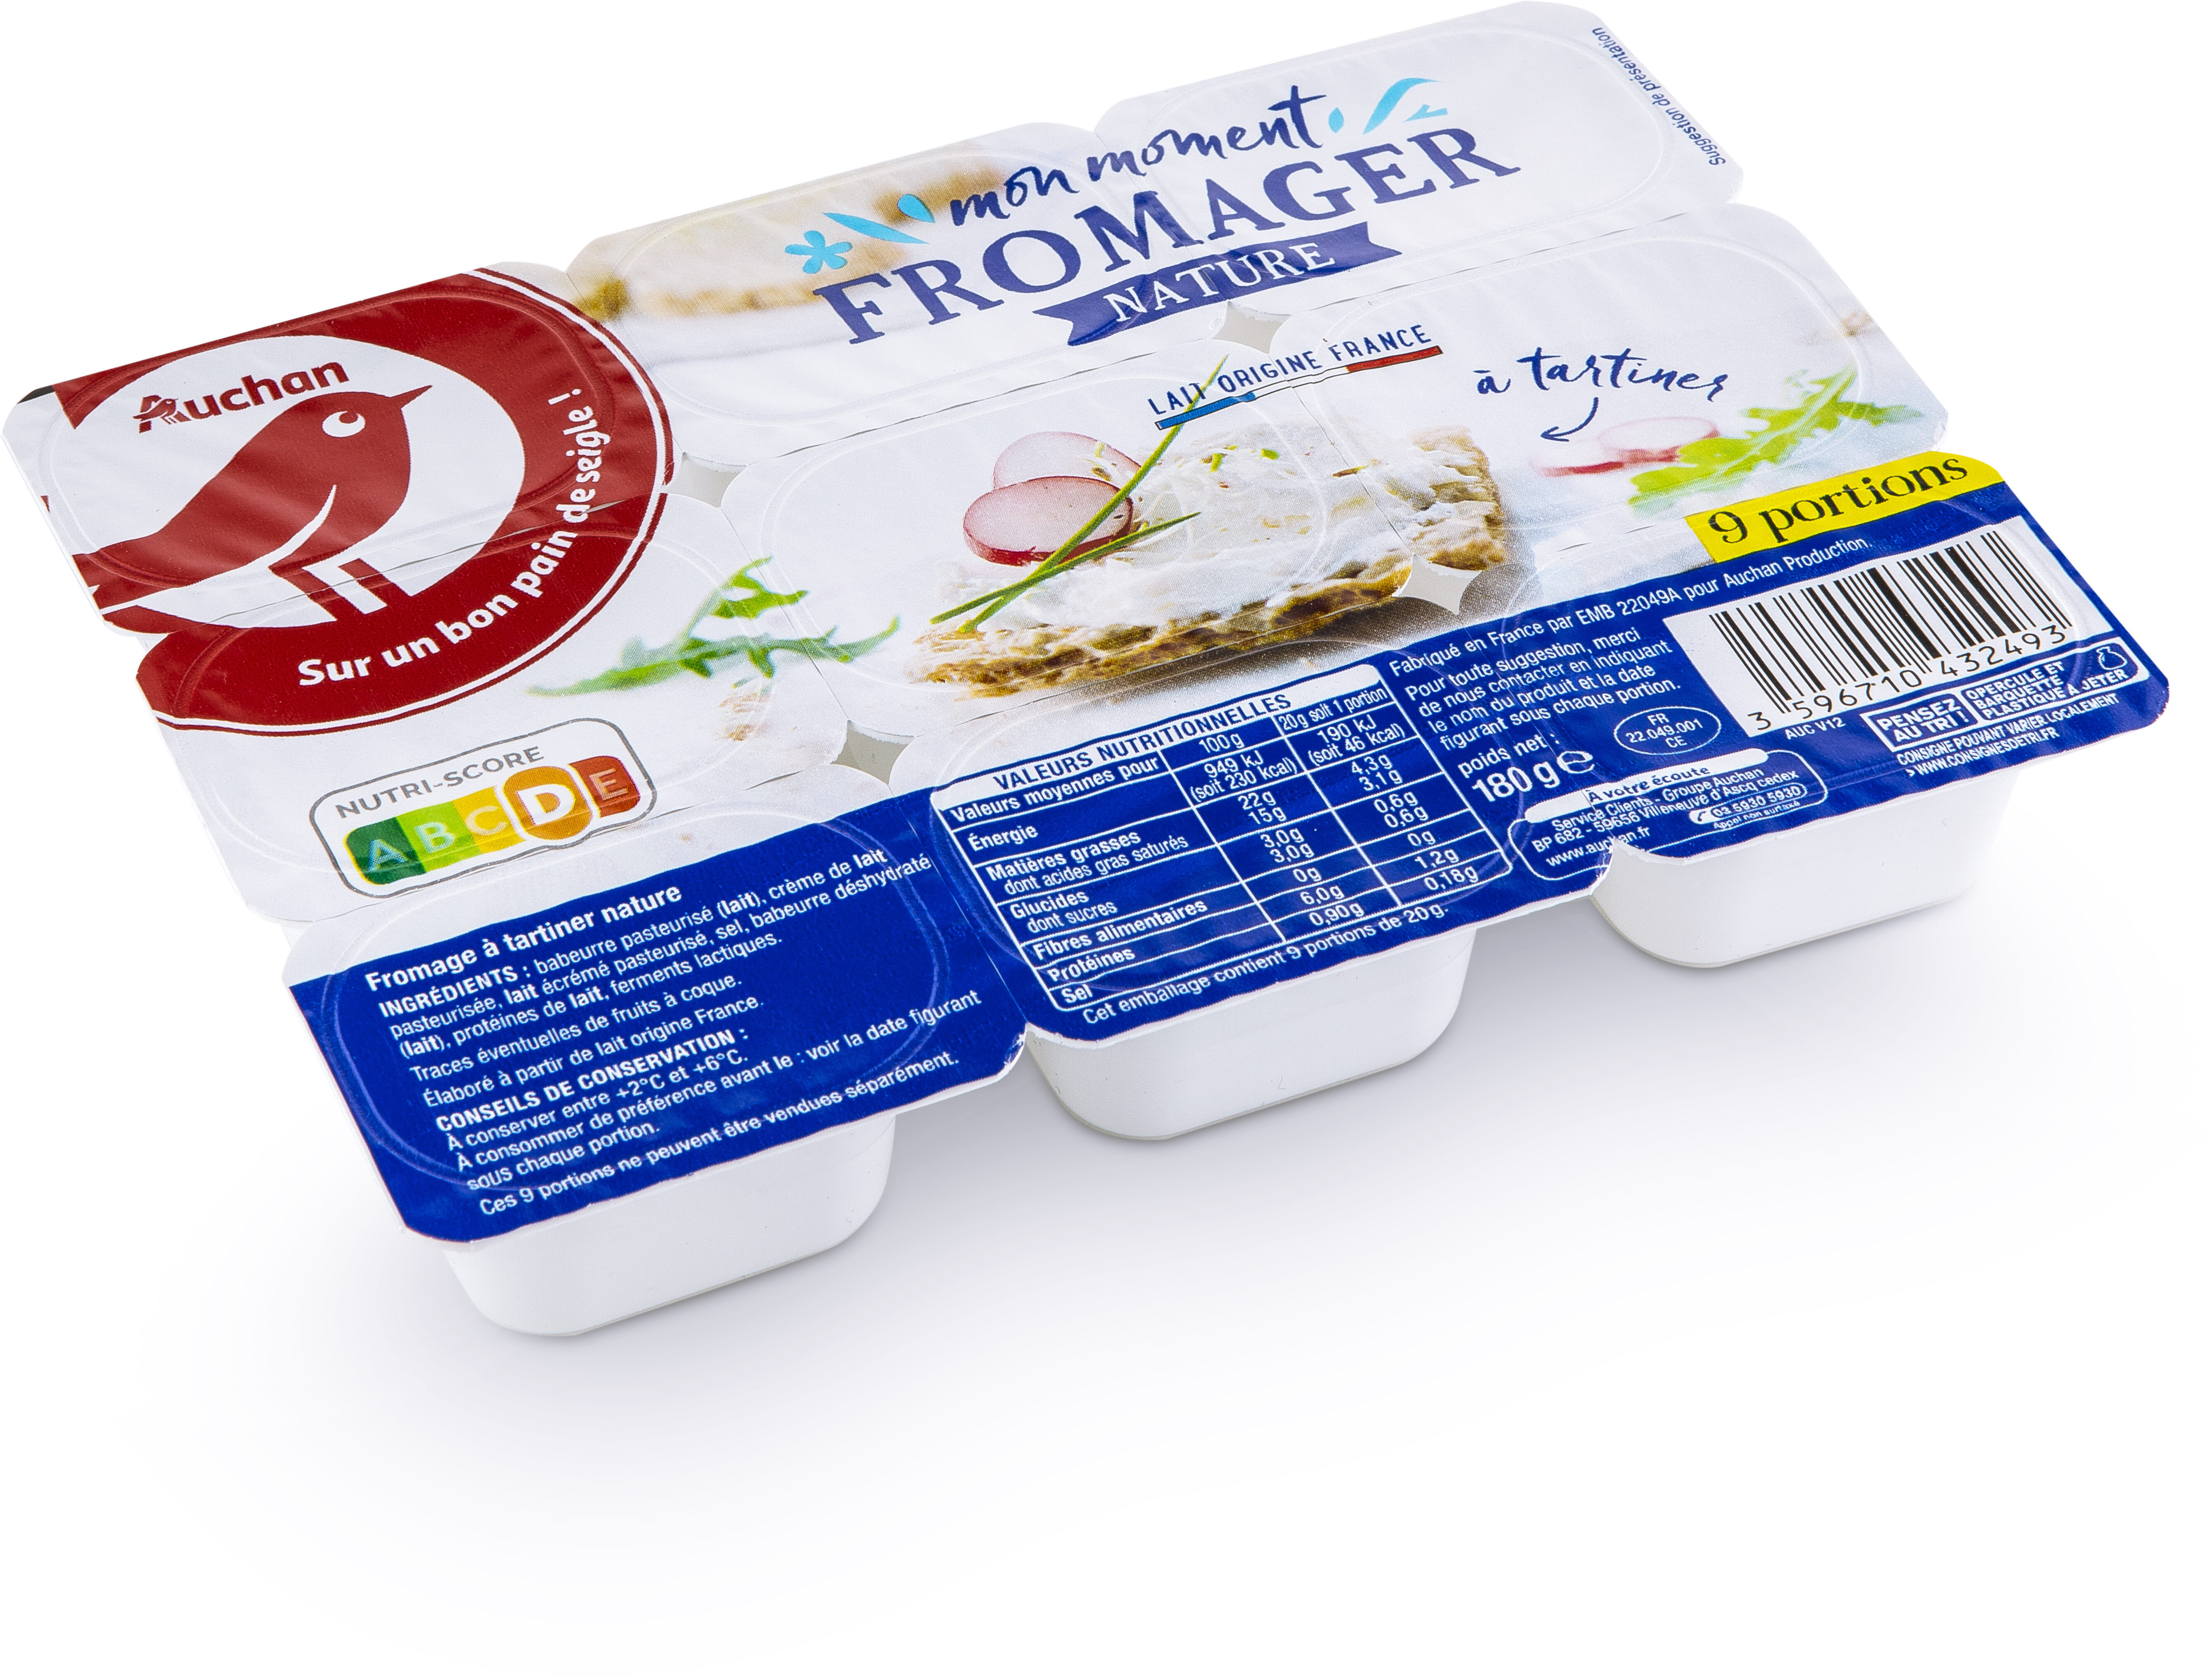 Mon moment fromager - Nature - 9 portions - Product - fr